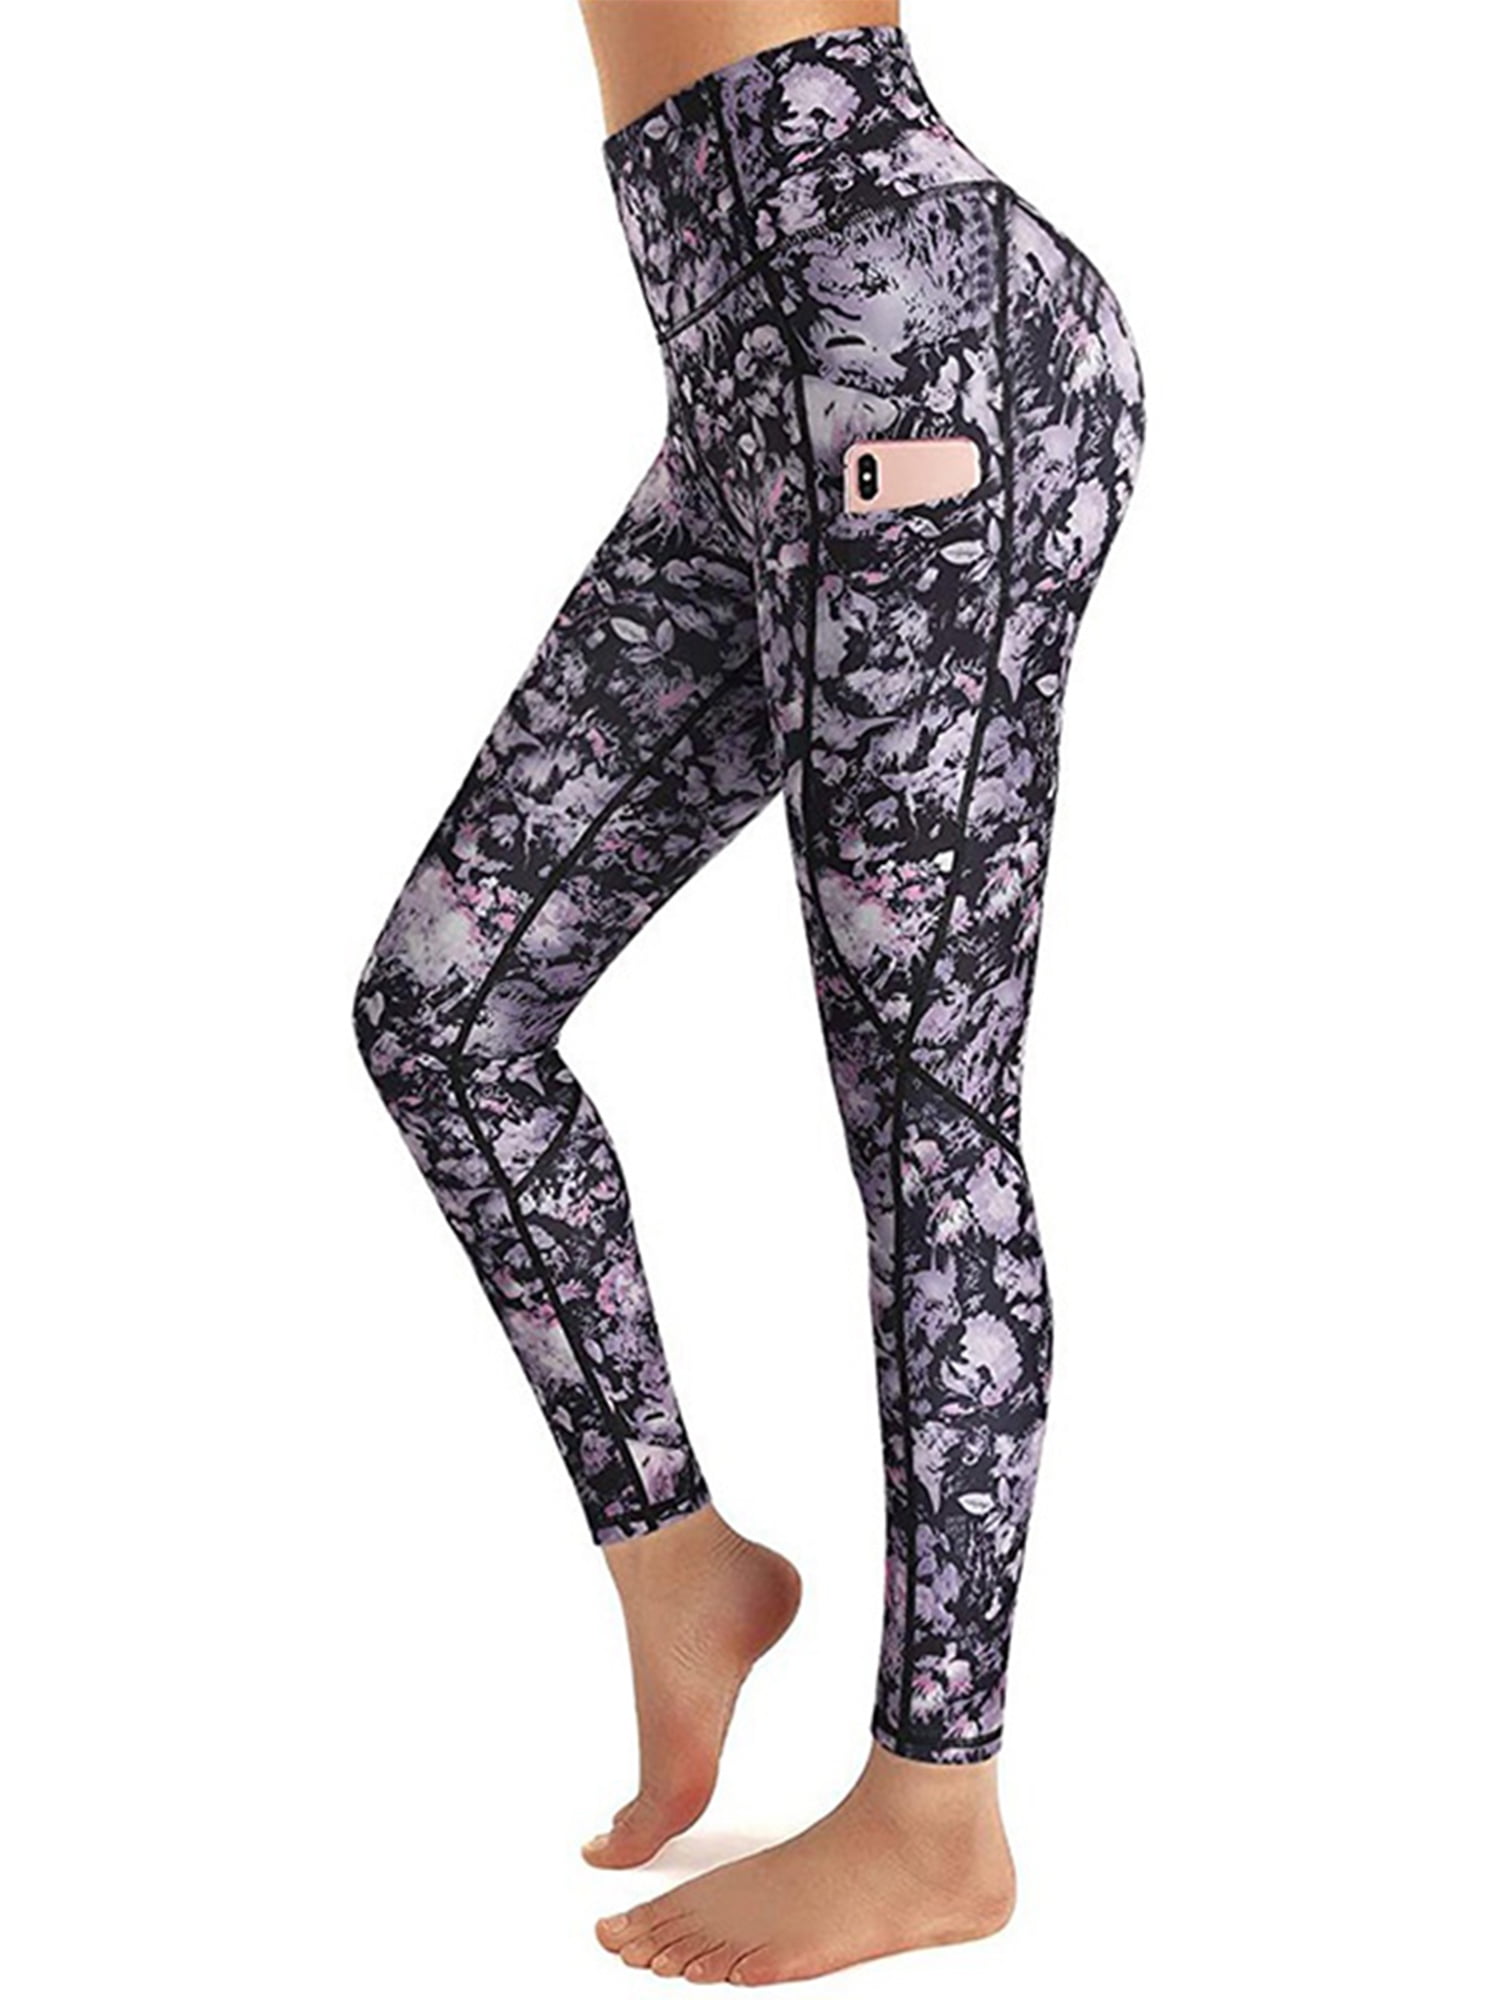 PATTERN HOUR Workout Leggings for Women with Pockets,Women's Squat Proof High Waisted Yoga Pants